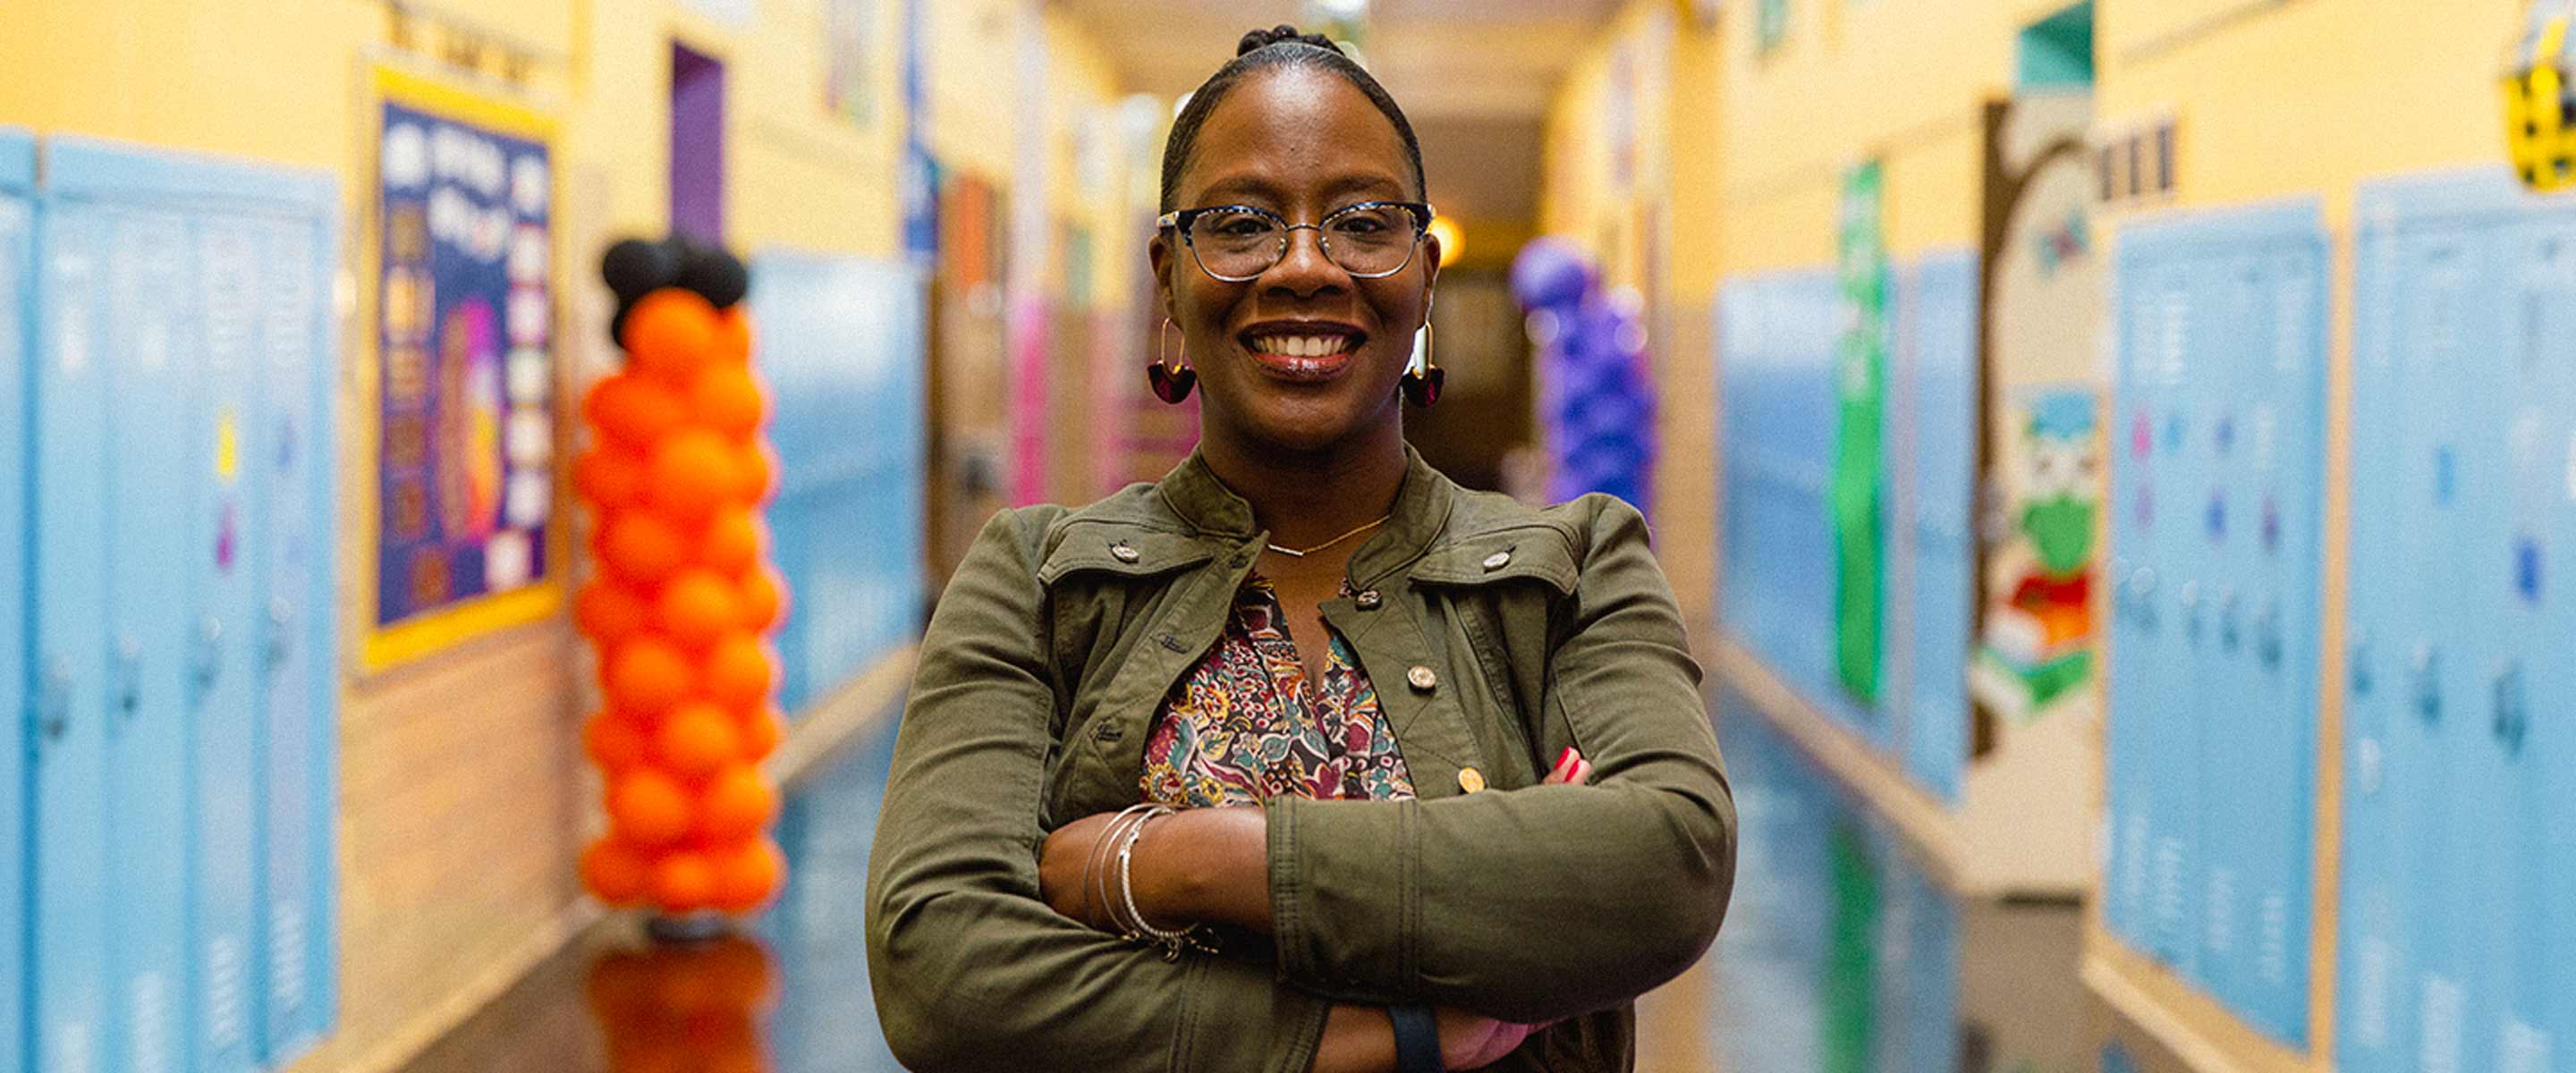 A person stands confidently with their arms crossed in the center of a vibrant school hallway, flanked by rows of lockers in varying shades of blue. They are wearing glasses, a patterned top, and a military green jacket, accessorized with hoop earrings and a pendant necklace. The background features colorful student lockers, educational posters, and a string of orange spherical decorations, suggesting a lively and dynamic educational environment. The focus on the individual, their attire, and the setting indicates their role may be significant within this school community.